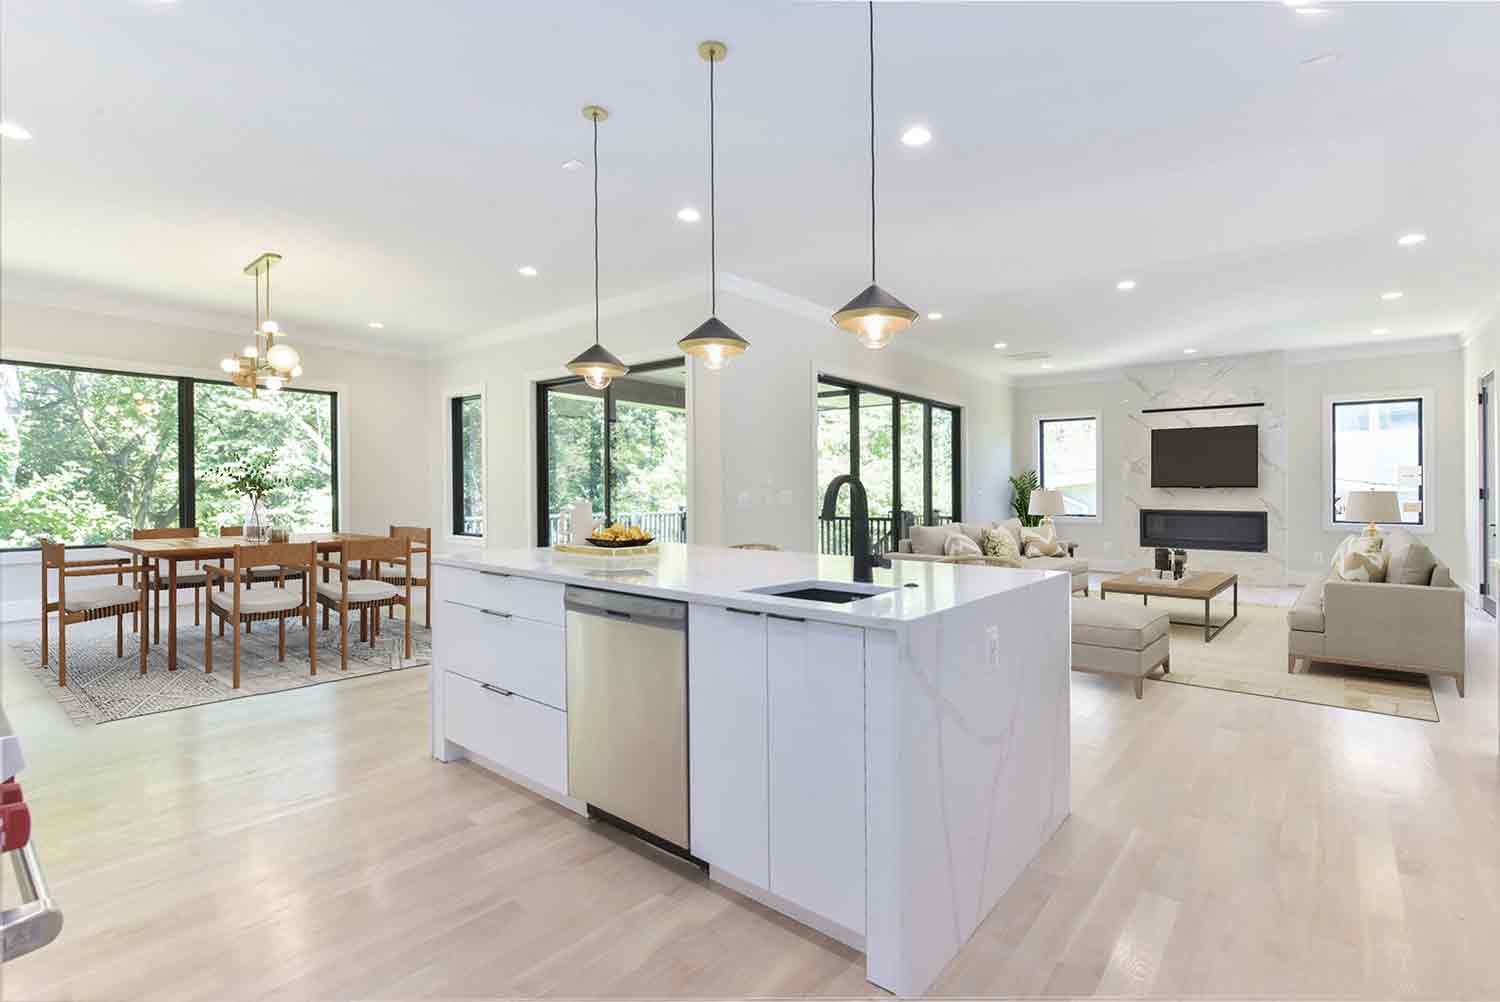 Kitchen island and open living area of custom home in Falls Church, Fairfax County